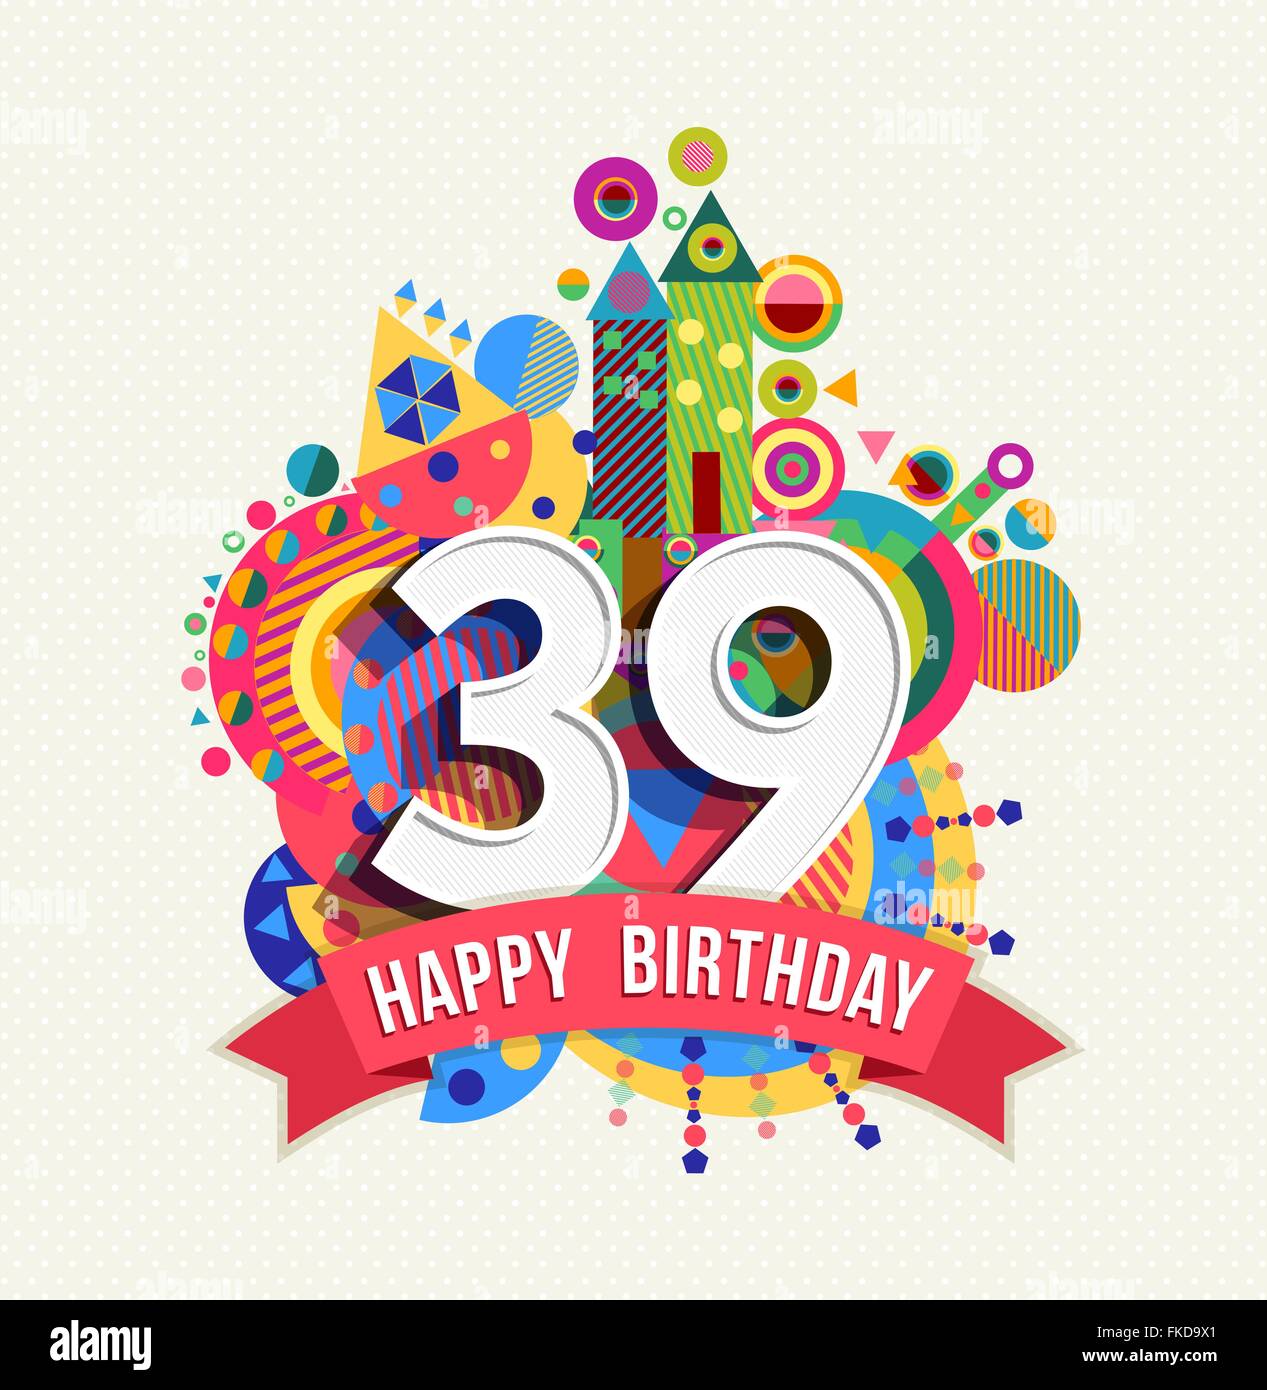 Happy Birthday thirty nine 39 year, fun celebration anniversary greeting card with number, text label and colorful geometry Stock Vector